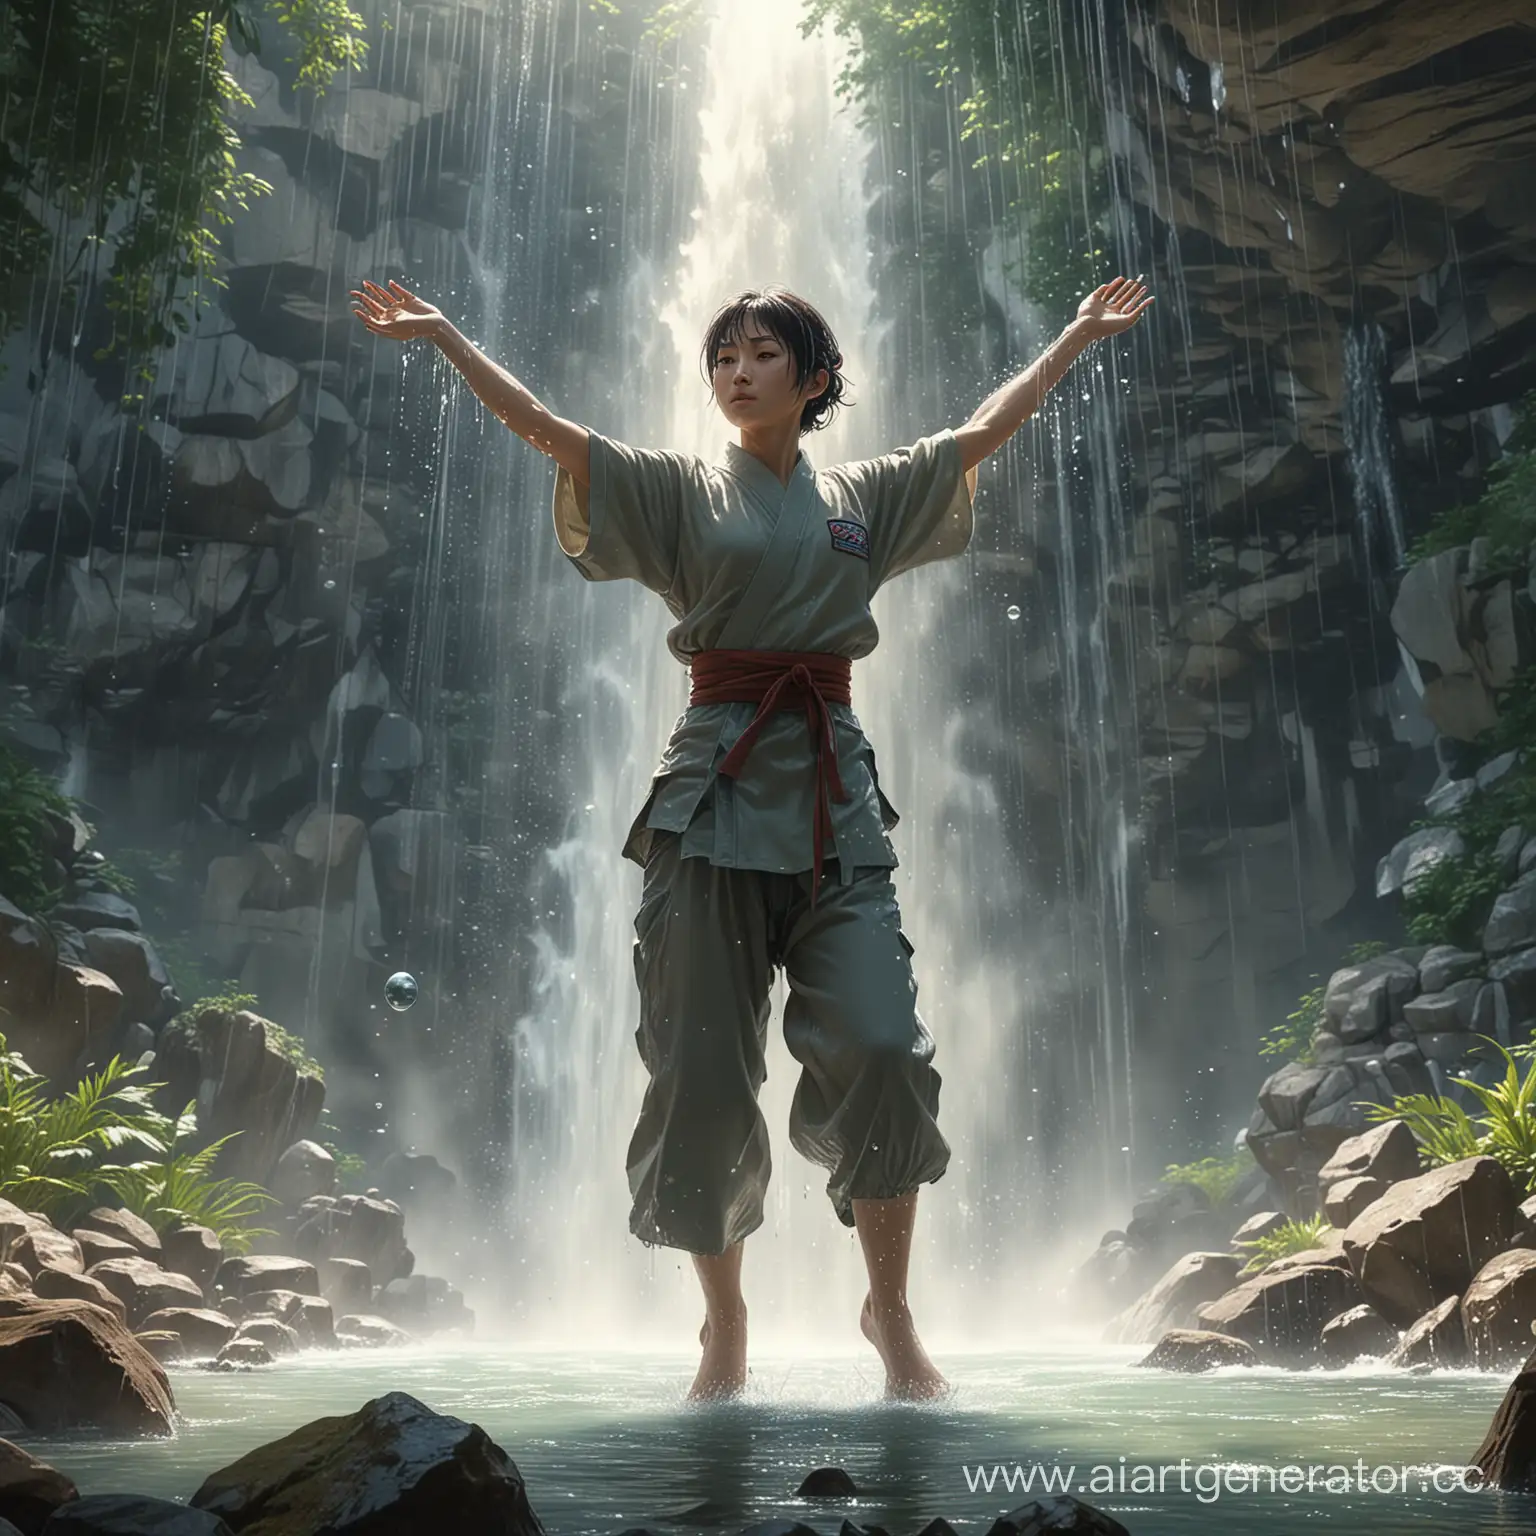 muscular Chinese pugilist, Makoto_Shinkai, Miwa_Komatsu, (dynamic acrobatic pose:1.1), standing facing under a waterfall, (determination, grit:1.1), (hands outstretched playing with water magic orbs:1.1), beautiful detailed realistic eyes and face, long eyelashes, whimsical background landscape of flora, misty waterfall, epic cinematic creative lighting, (photorealistic 16K acrylic ink style illustration:1.21)